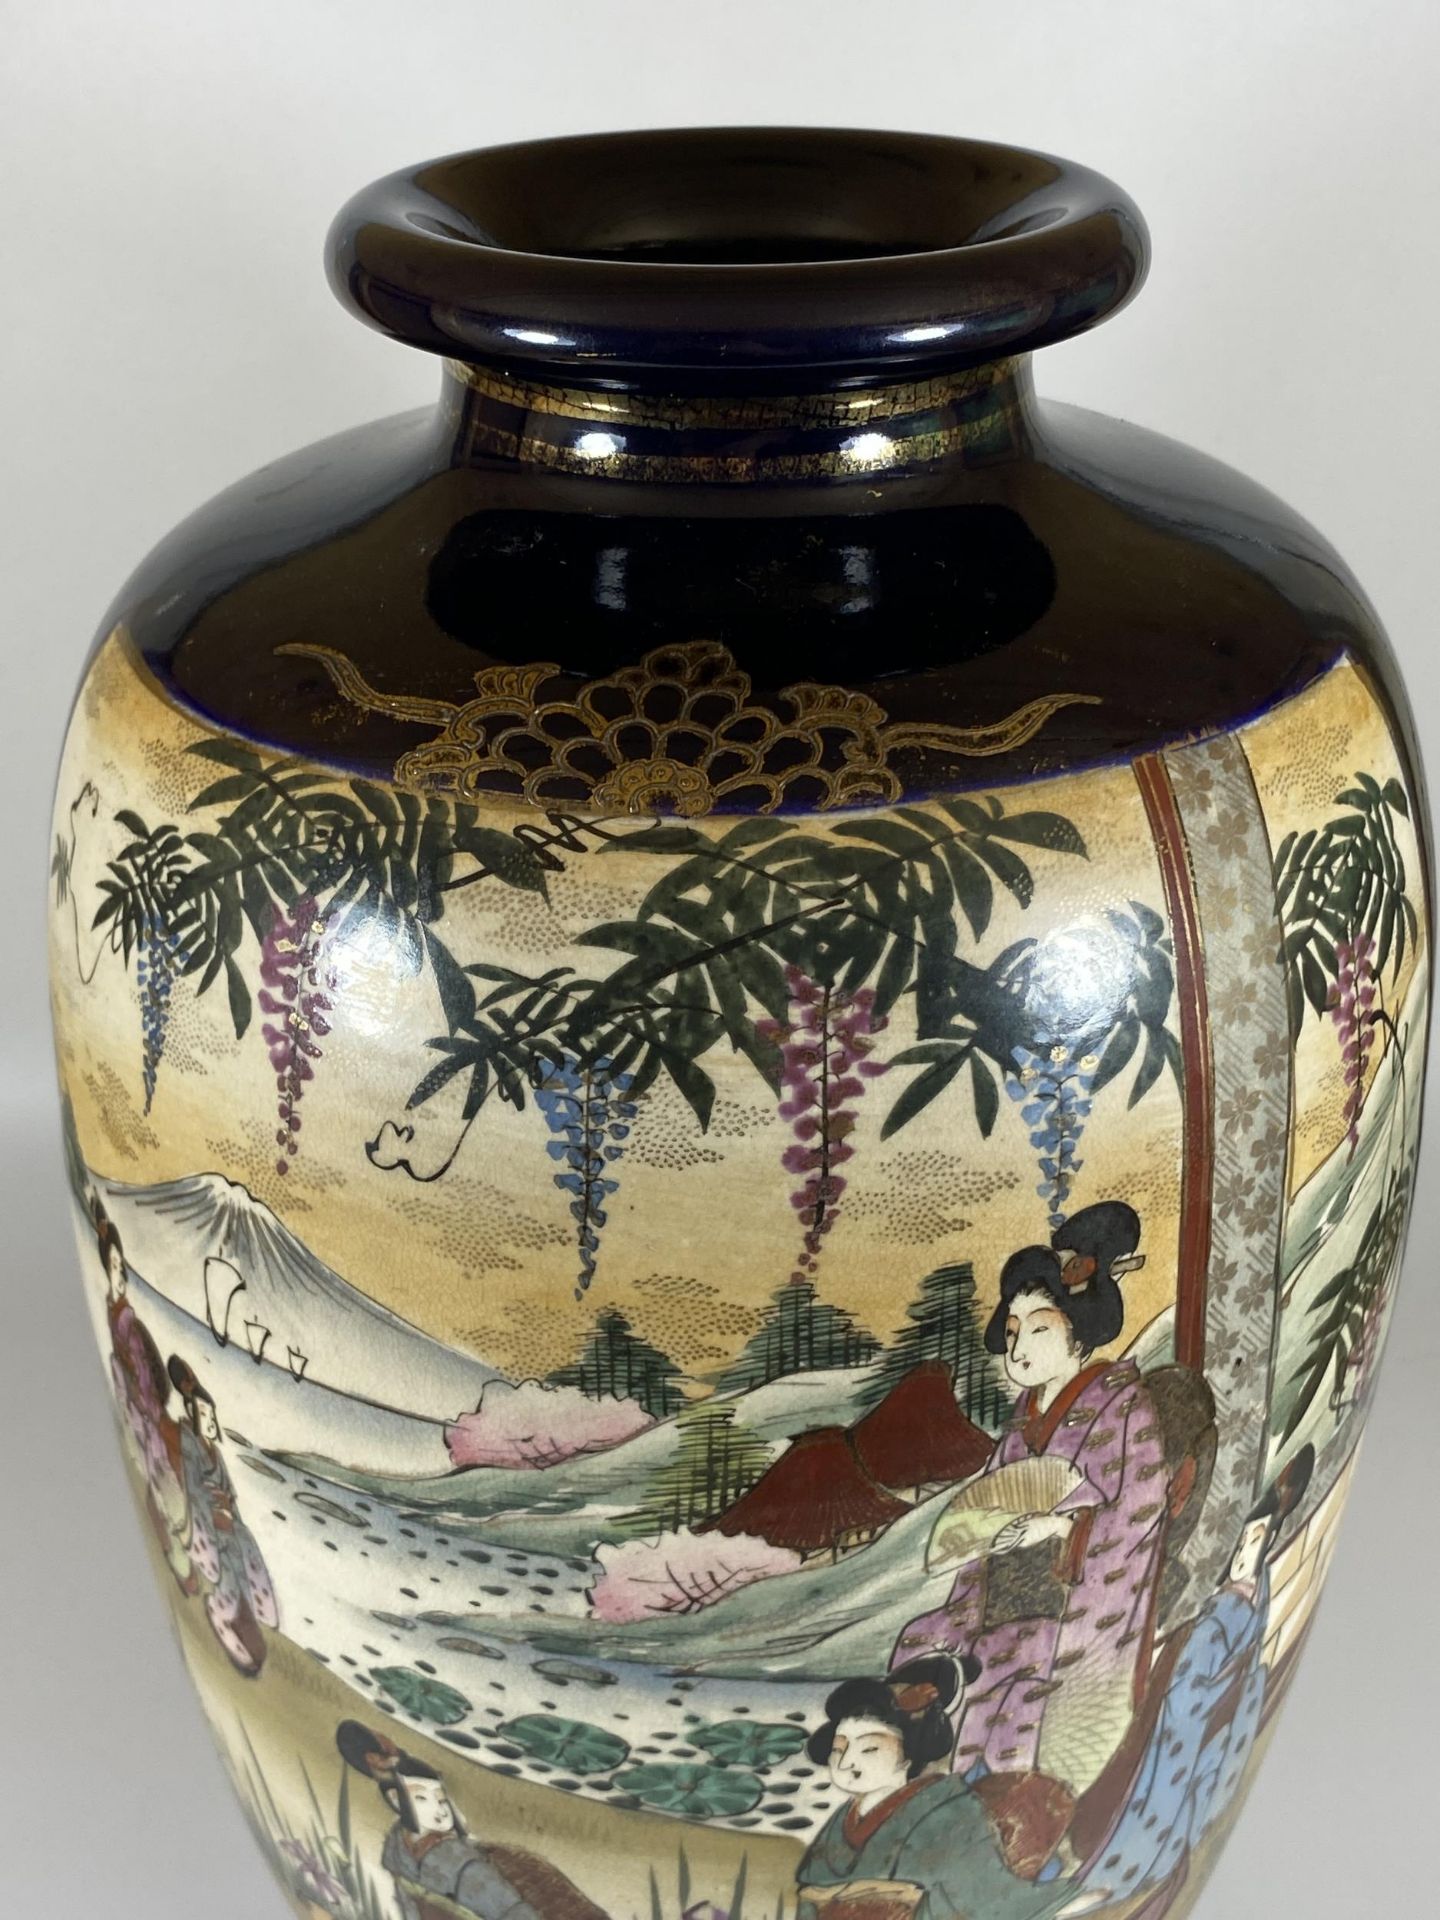 A LARGE JAPANESE HAND PAINTED MEIJI PERIOD VASE, WITH PANELLED DESIGN DEPICTING FIGURES BY A - Image 2 of 6